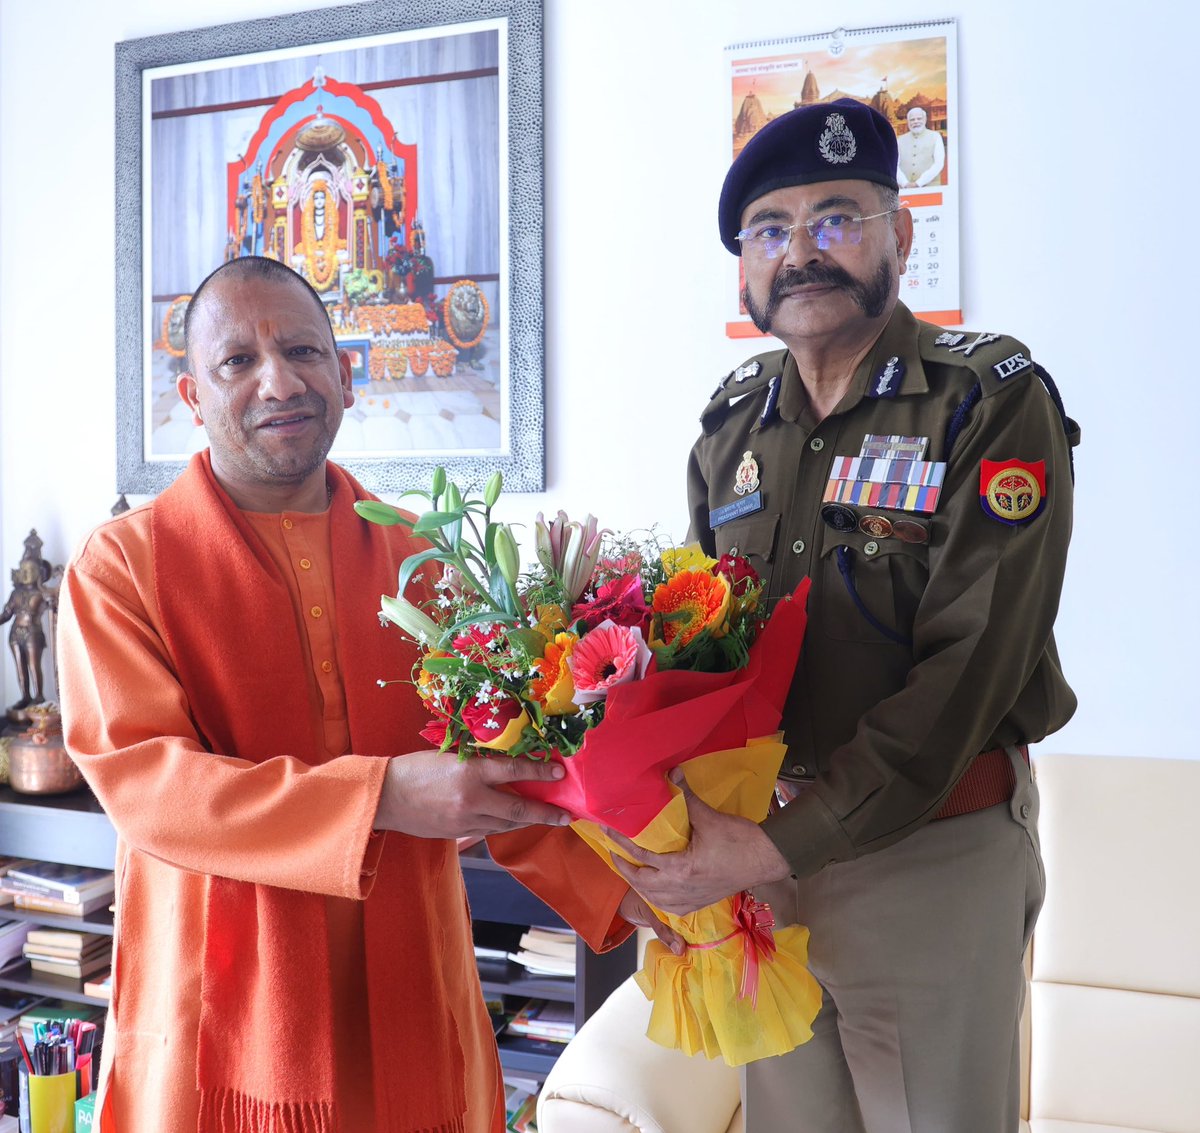 Embarking on a new journey, I'm deeply grateful to Hon'ble CM UP, Sri @myogiadityanath Ji, for his trust & blessings. Inviting #UPPolice family & all citizens to unite for a safer state, weaving a legacy of trust, safety, & respect. Together, we stand strong!

#ServiceBeforeSelf